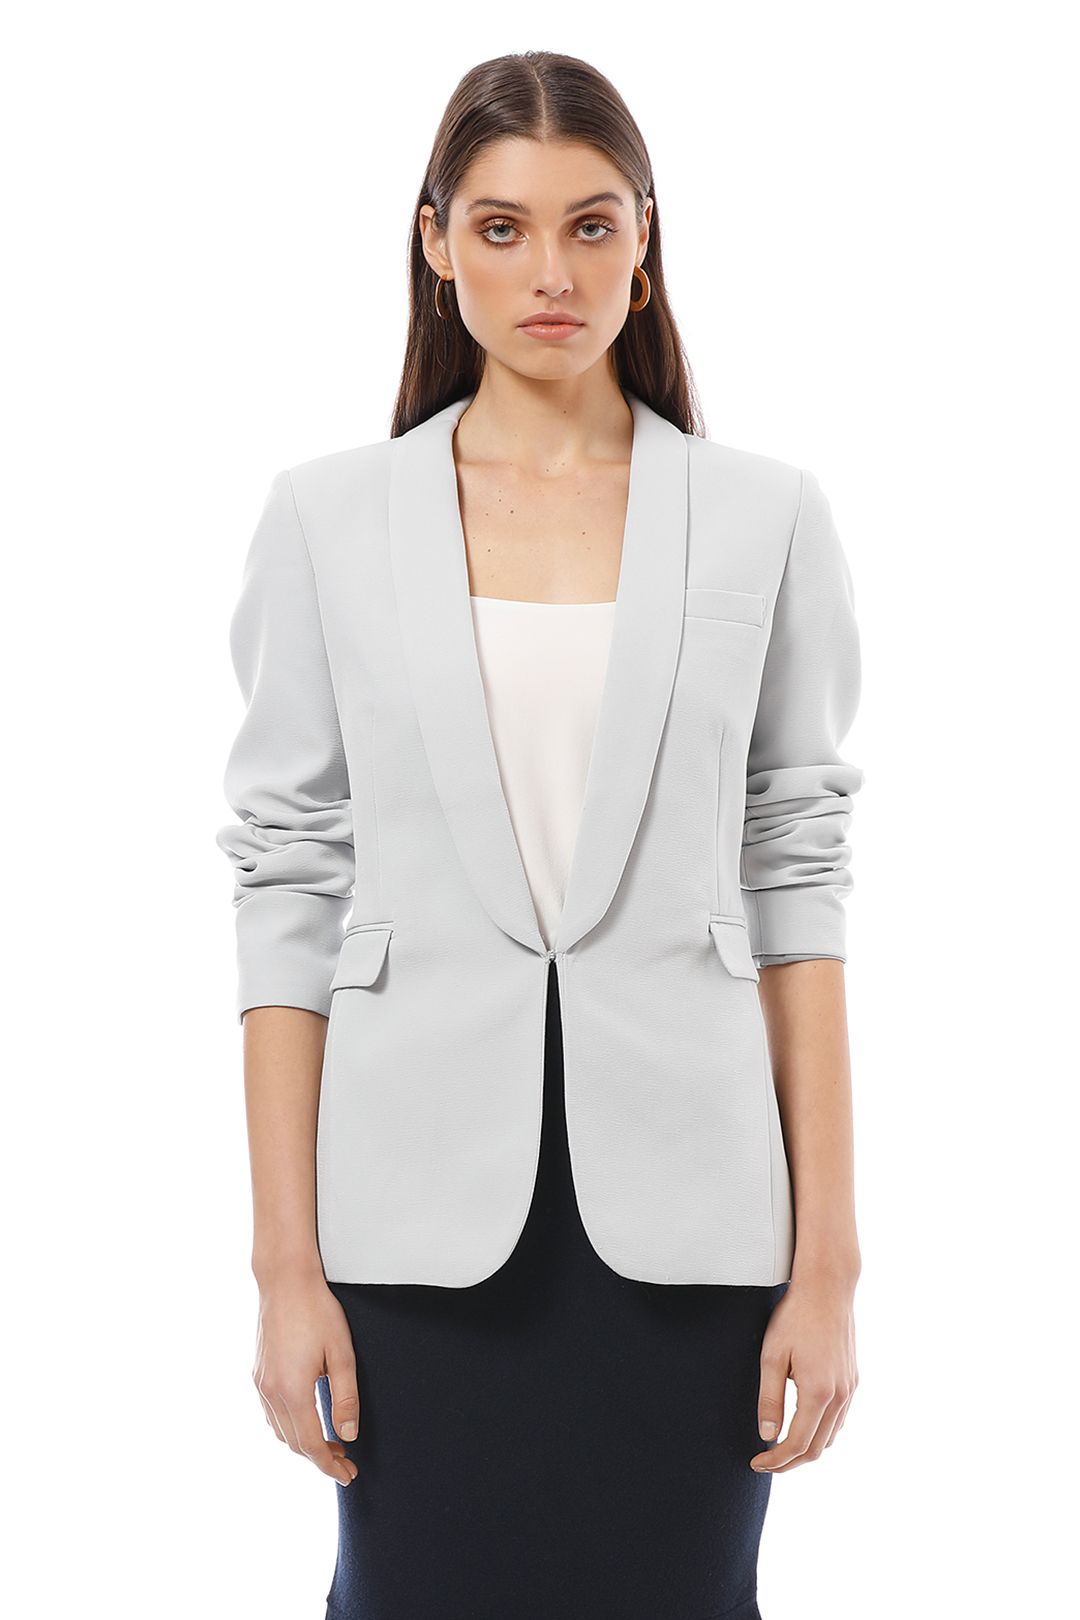 Friend of Audrey - Alma Fitted Blazer - Blue - Front Detail